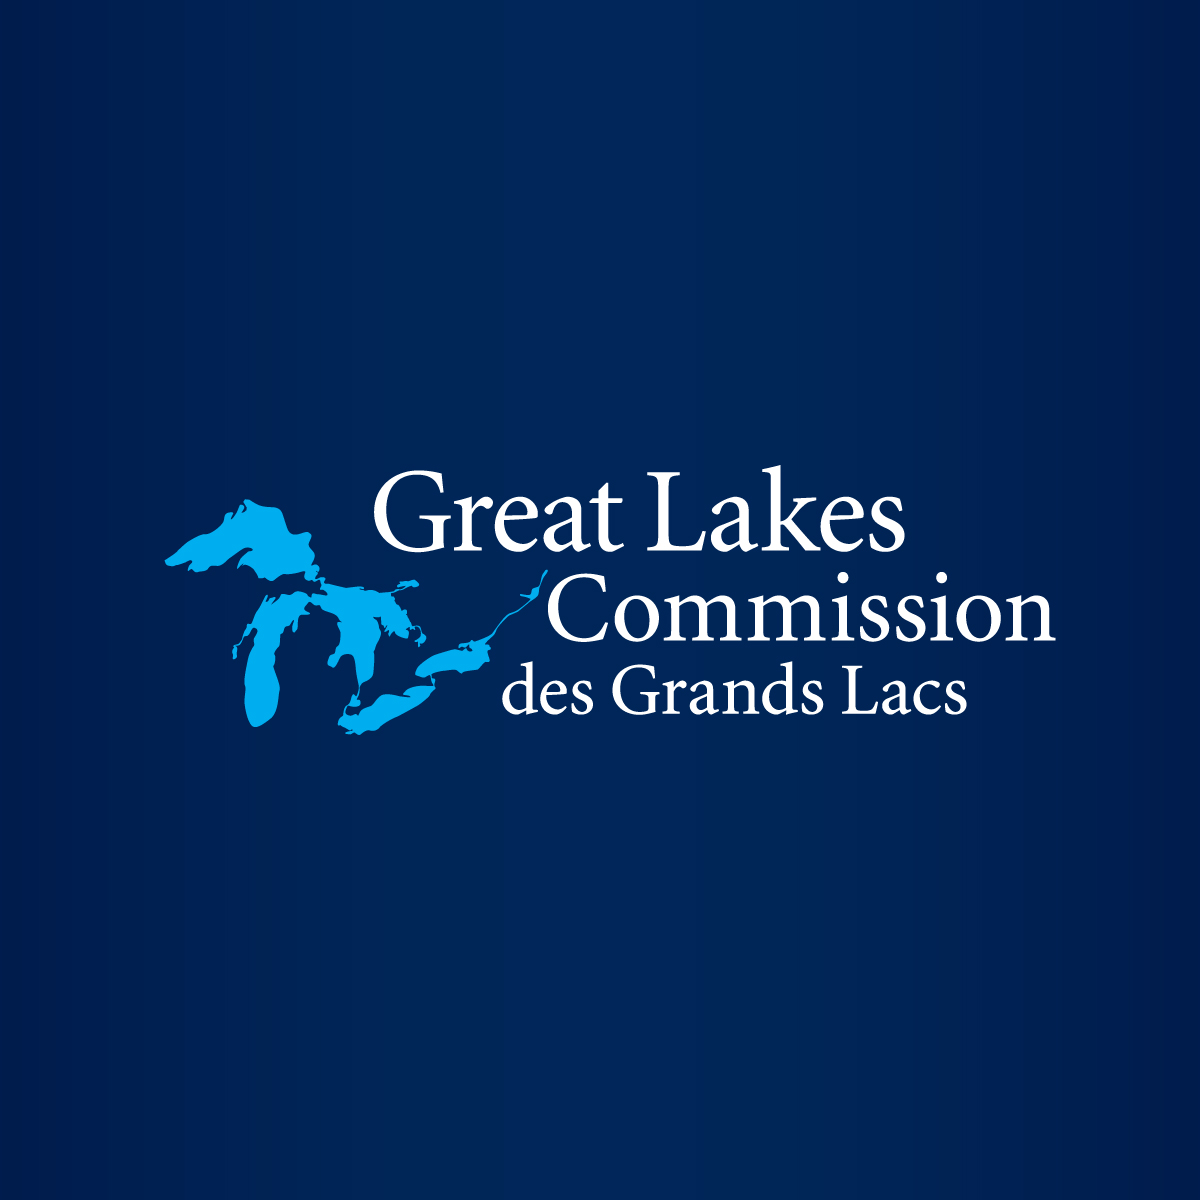 as great lakes agreement reaches milestone anniversary protections as vital as ever